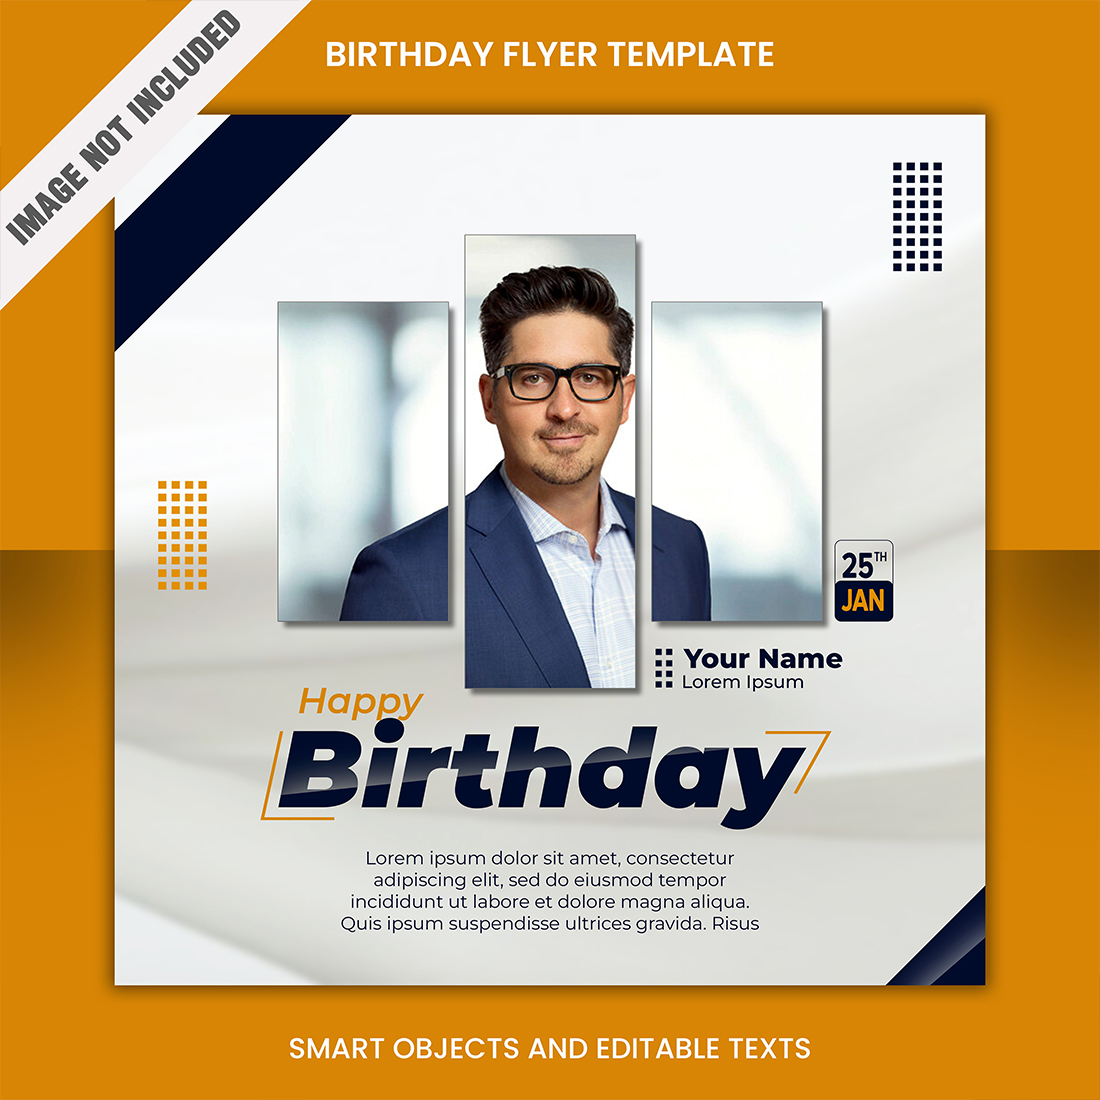 Birthday Flyer Design Template cover image.